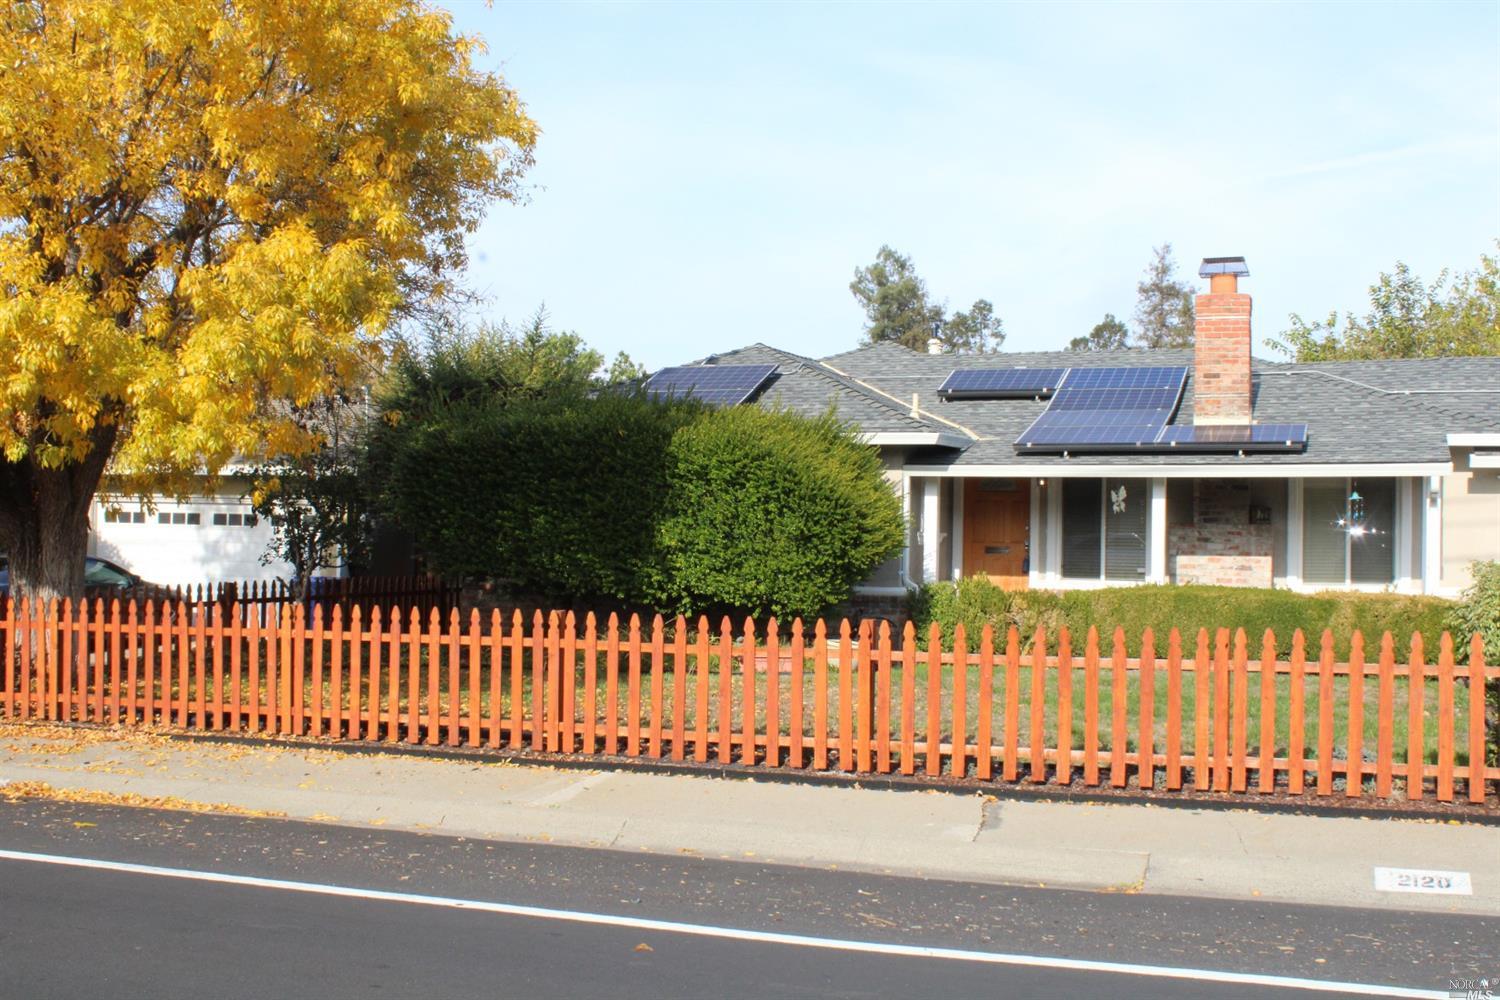 a view of a house with a wooden fence